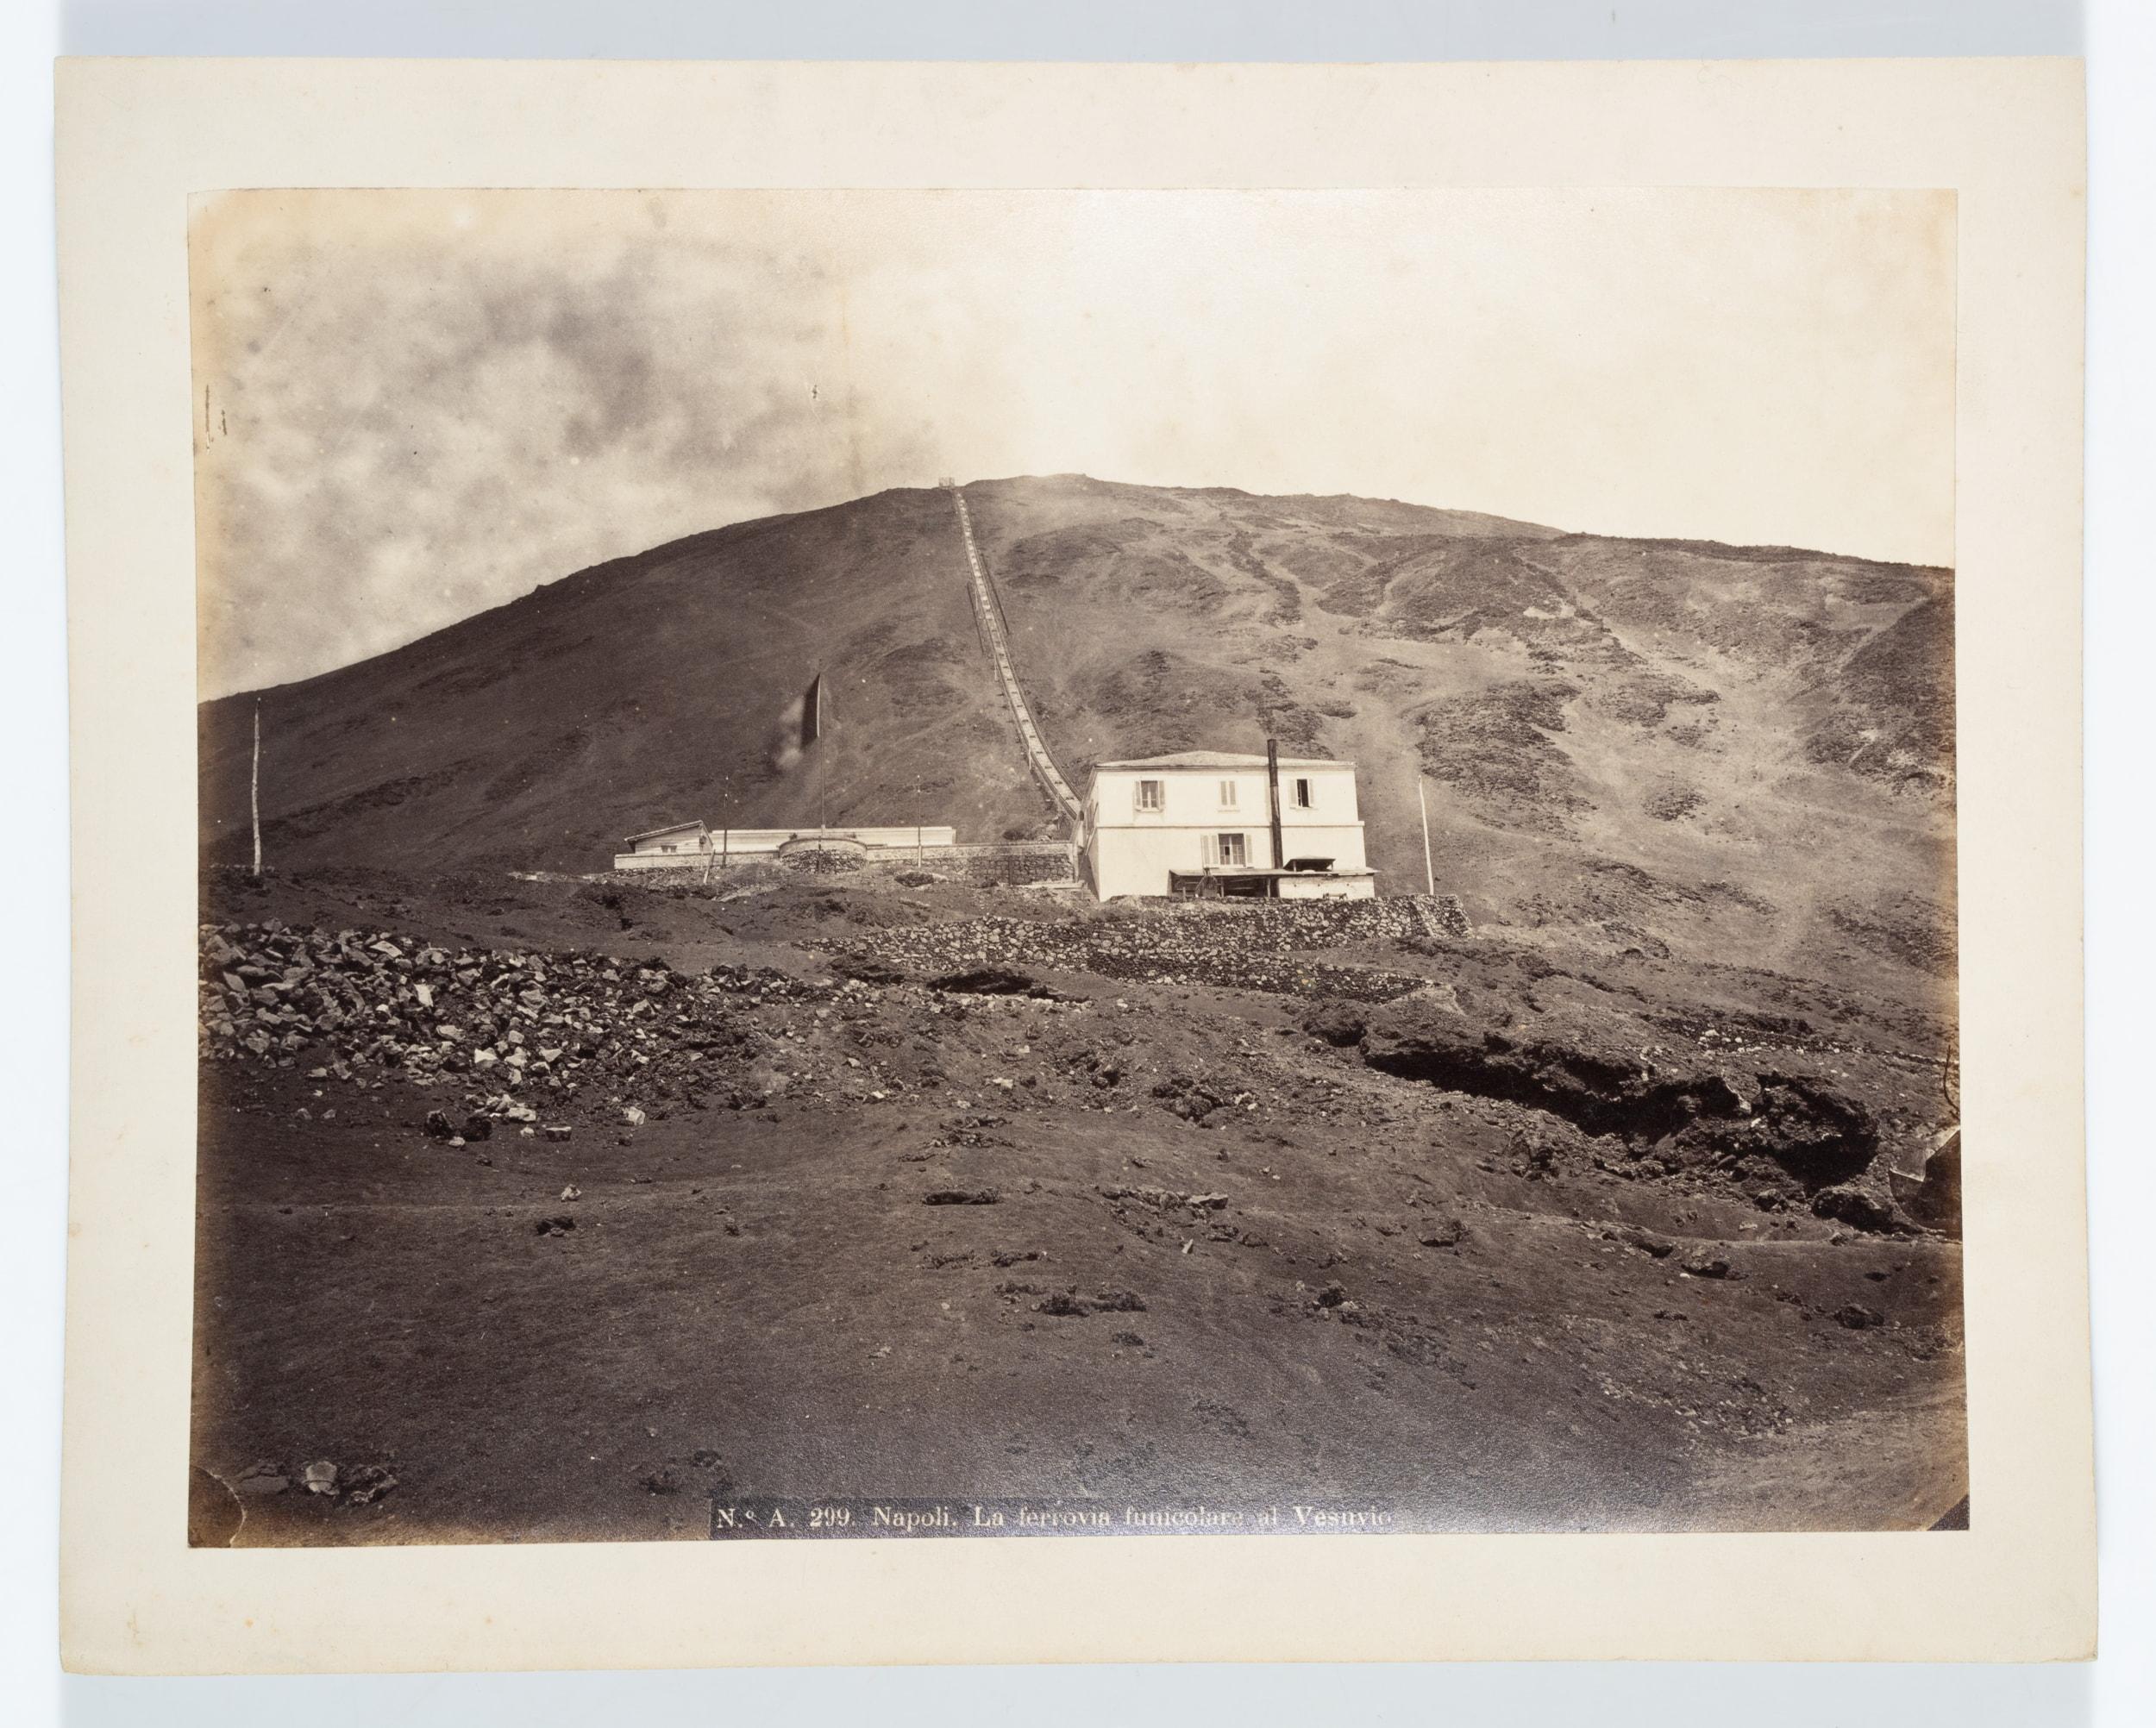 Fratelli Alinari (19th century) Circle: Photograph of the now destroyed cable car up Vesuvius, c. 1880, albumen paper print

Technique: albumen paper print, mounted on Cardboard

Inscription: At the lower part inscribed in the printing plate: 